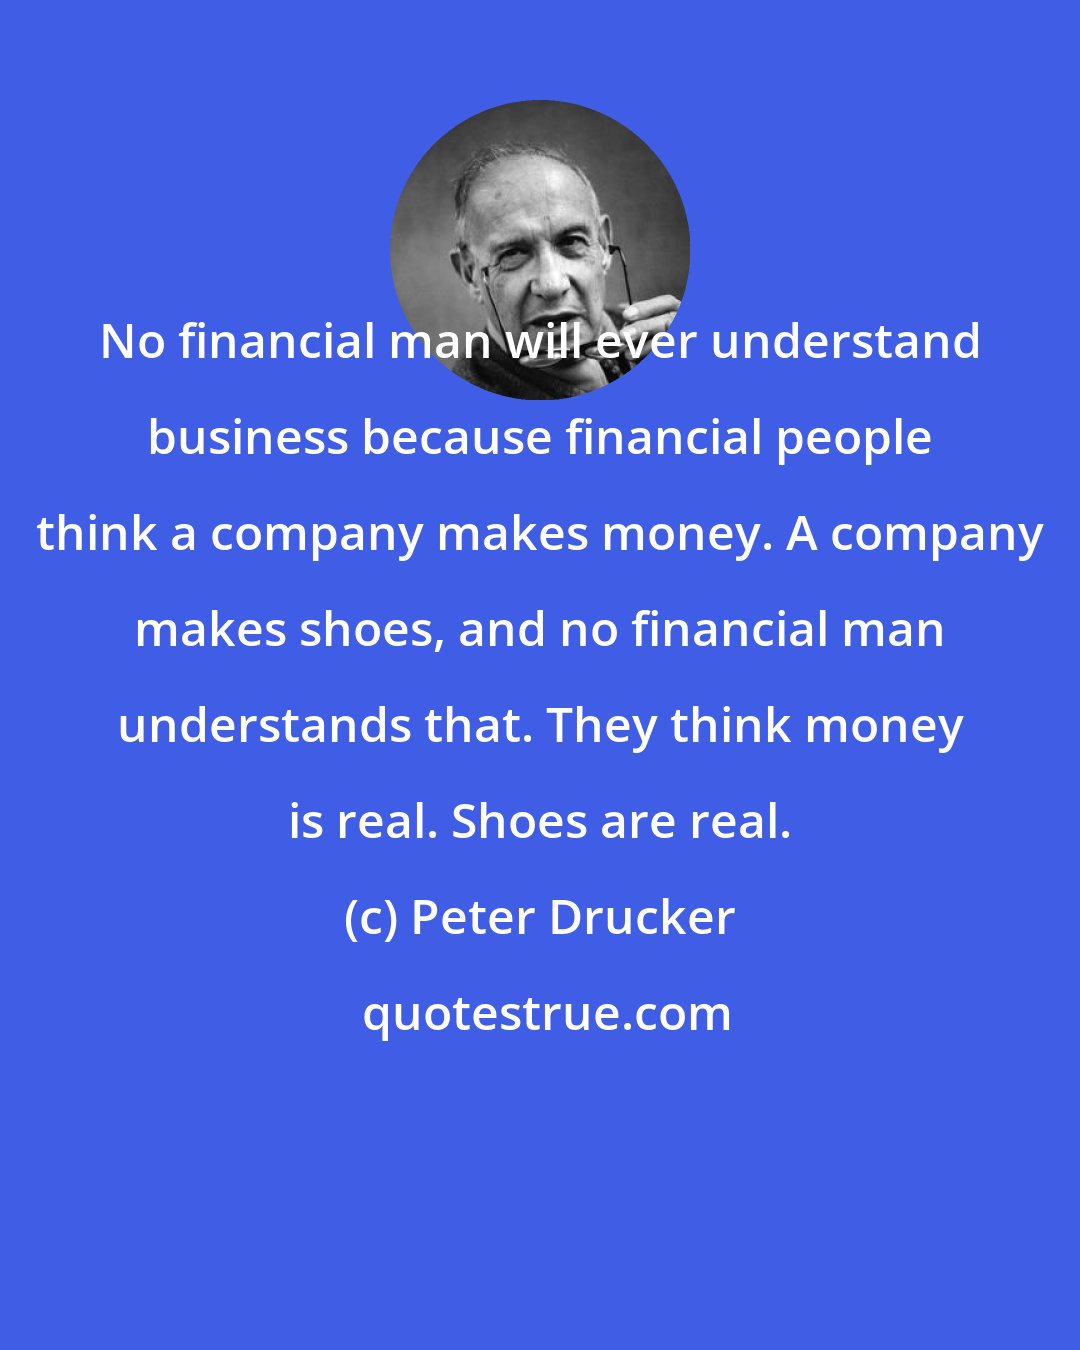 Peter Drucker: No financial man will ever understand business because financial people think a company makes money. A company makes shoes, and no financial man understands that. They think money is real. Shoes are real.